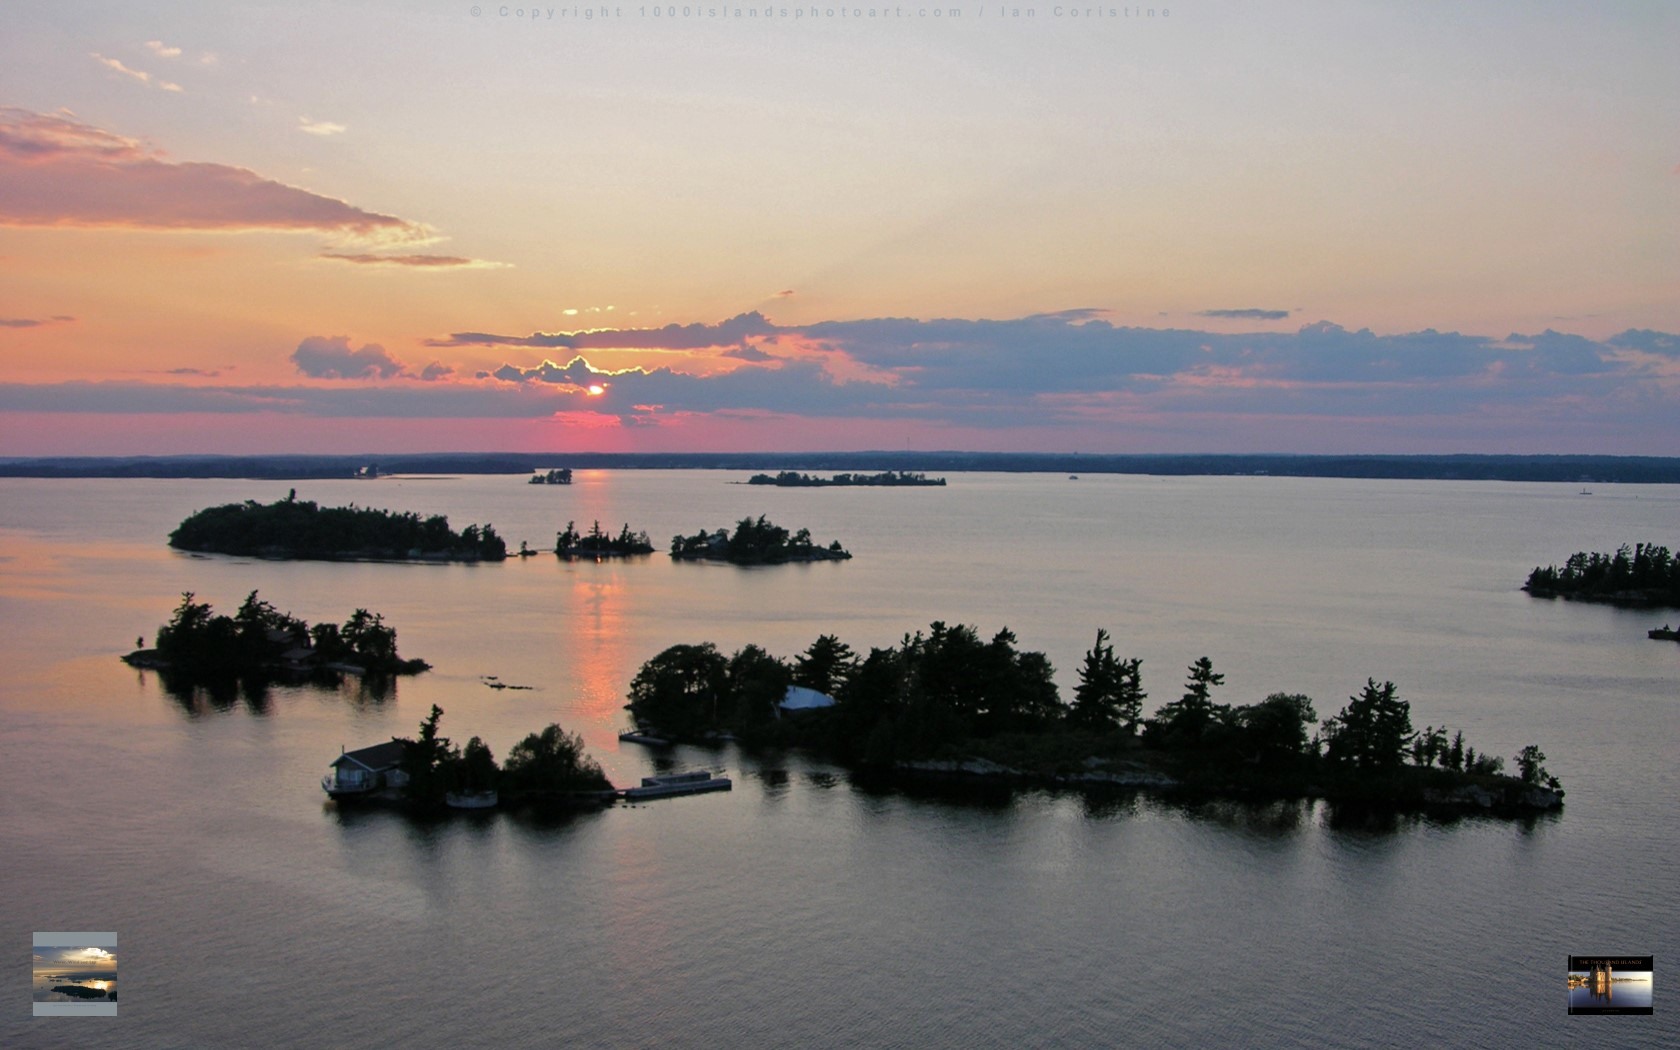 October 7, 2006:  The stretch of the St Lawrence River just east of Lake Ontario is known as the Thousand Islands region for fairly obvious reasons.  Lots and lots of islands...